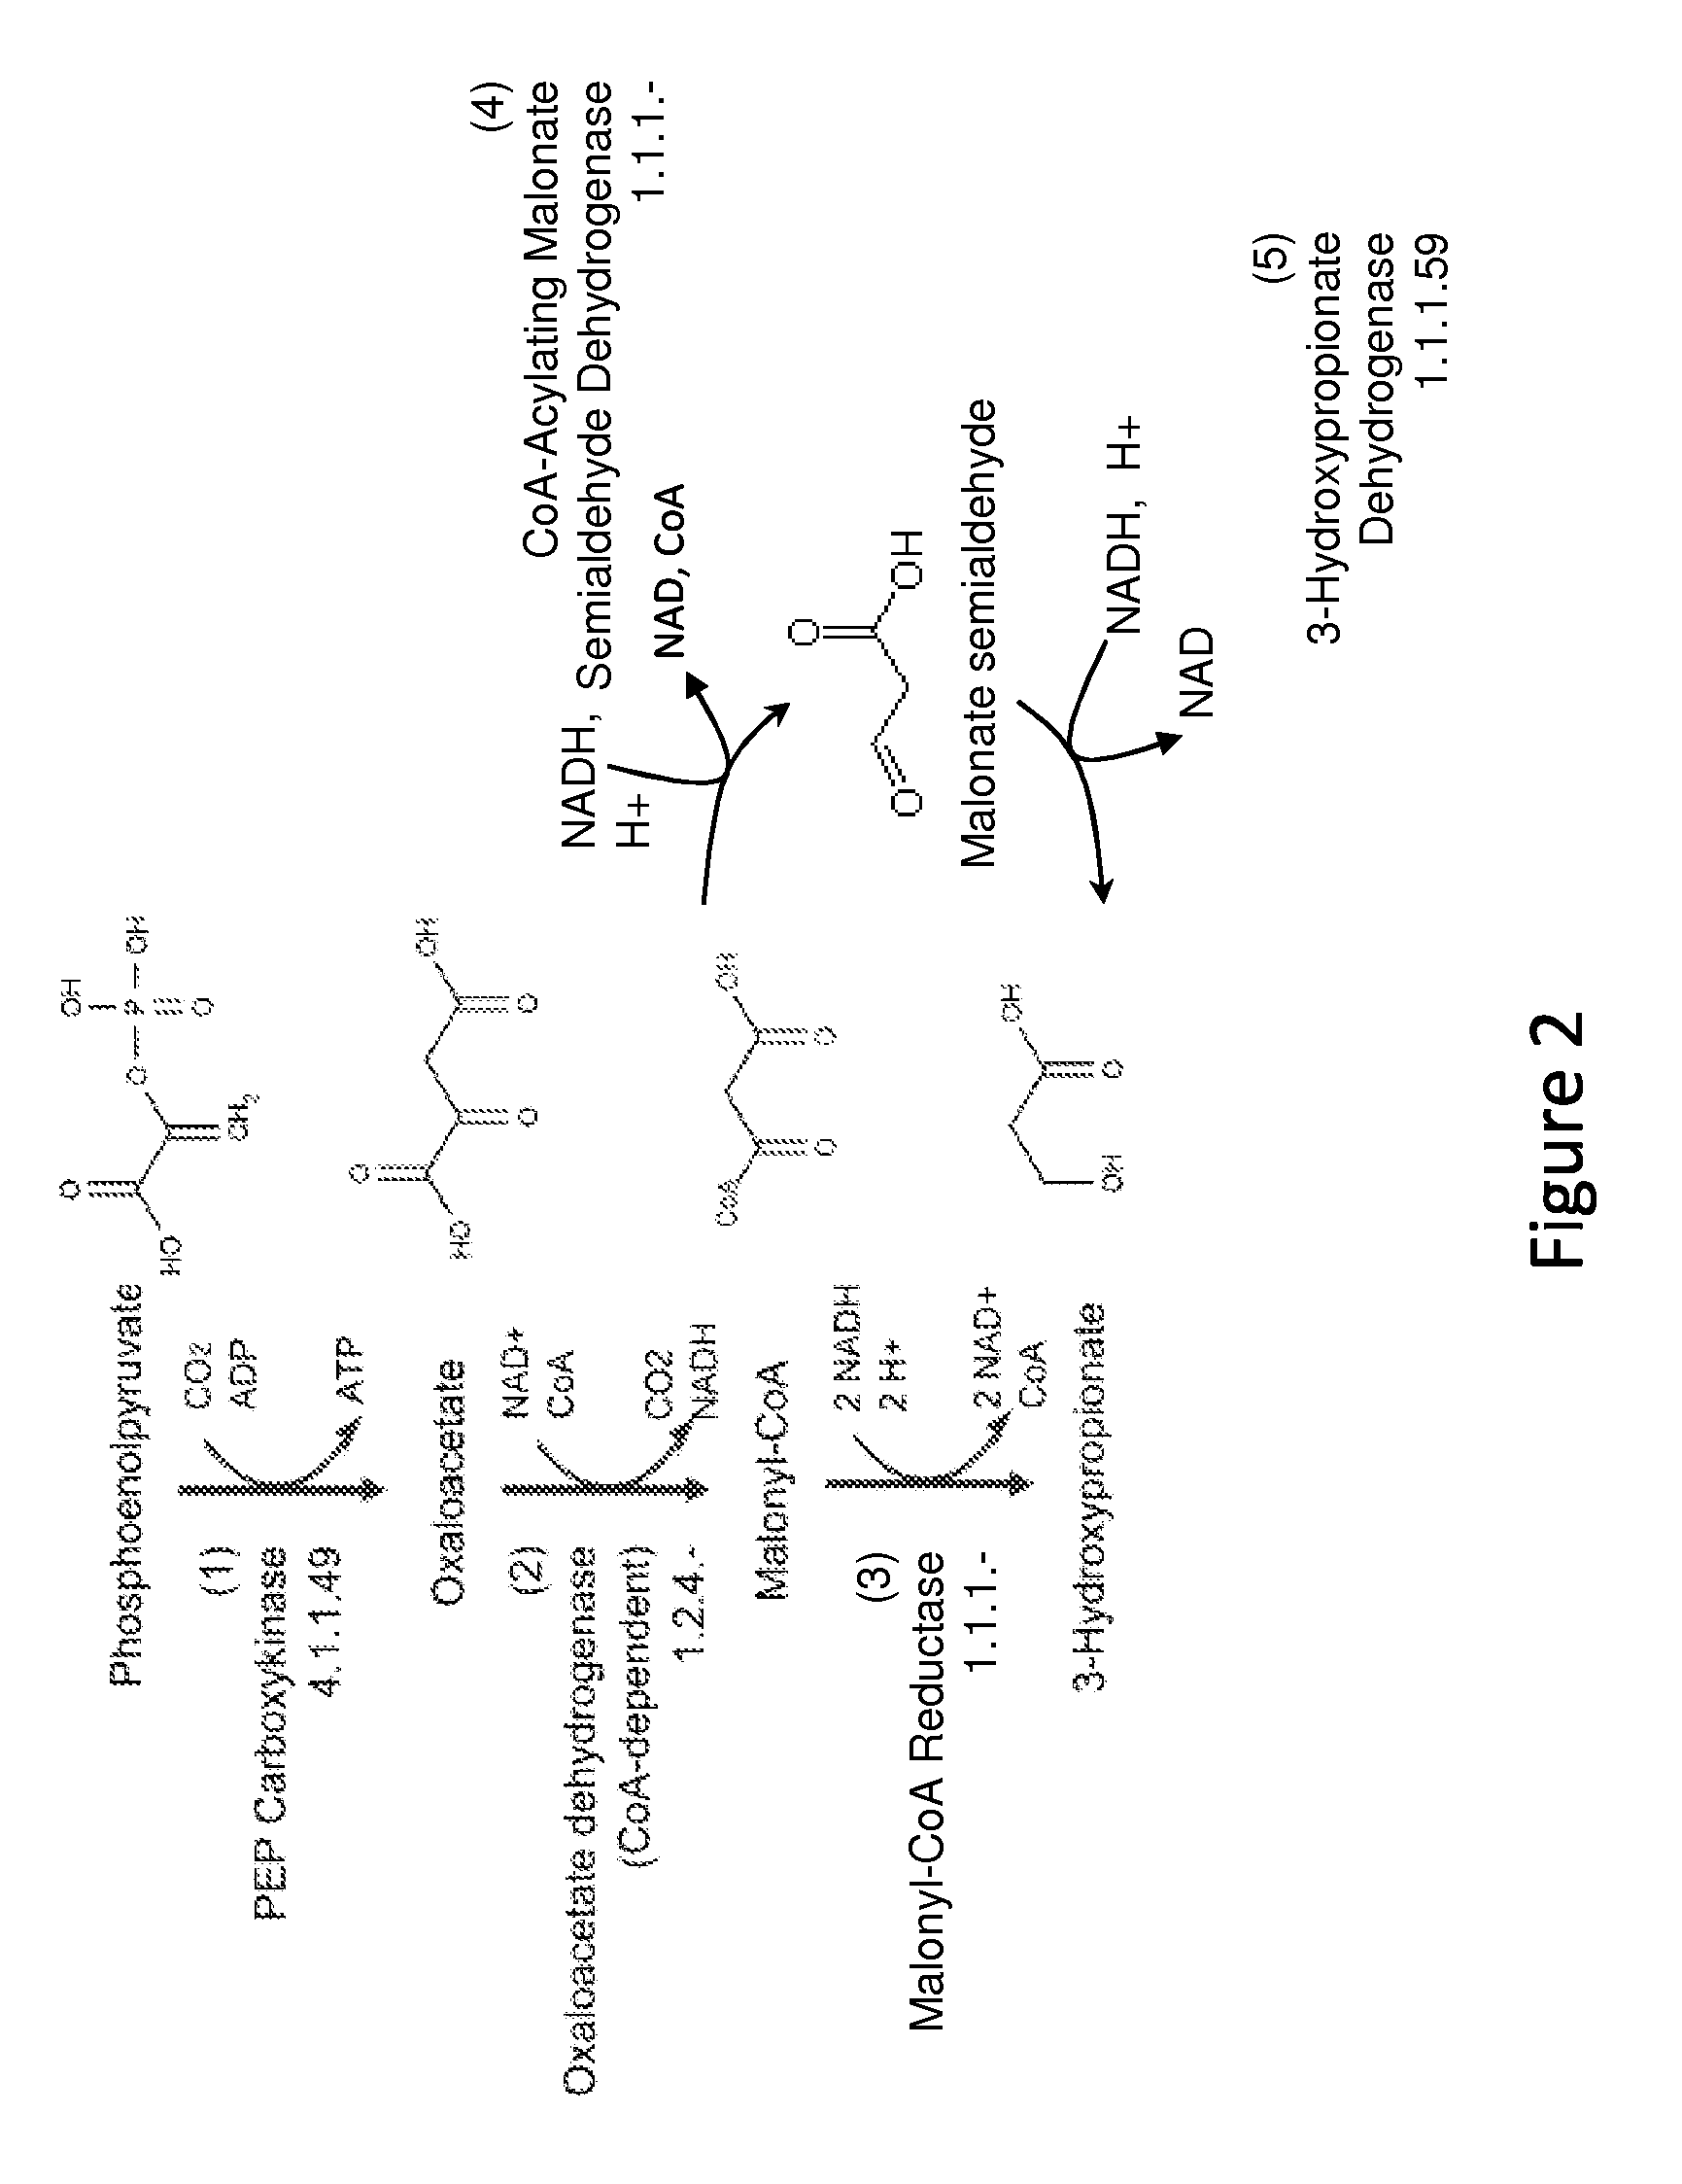 Methods and organisms for production of 3-hydroxypropionic acid